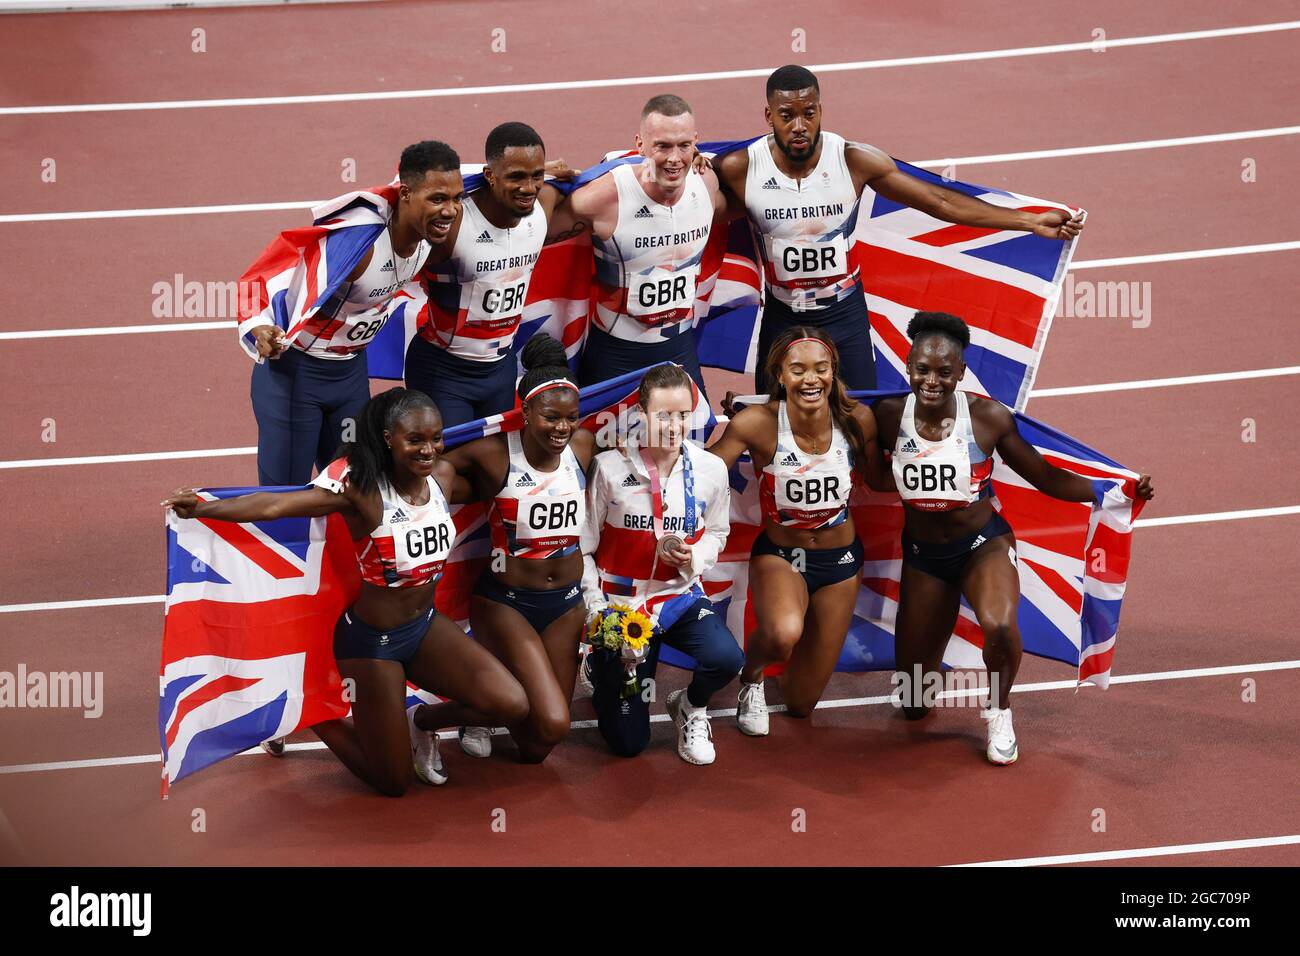 Tokyo, Japan. 06th Aug, 2021. Team Great Britain, Mens 4x100m Relay 2nd Silver Medal, Womens 4x100m Relay Bronze Medal, Women's 1500m Laura Muir Silver medal during the Olympic Games Tokyo 2020, Athletics Mens 4x100m Relay Final on August 6, 2021 at Olympic Stadium in Tokyo, Japan - Photo Photo Kishimoto / DPPI Credit: Independent Photo Agency/Alamy Live News Stock Photo